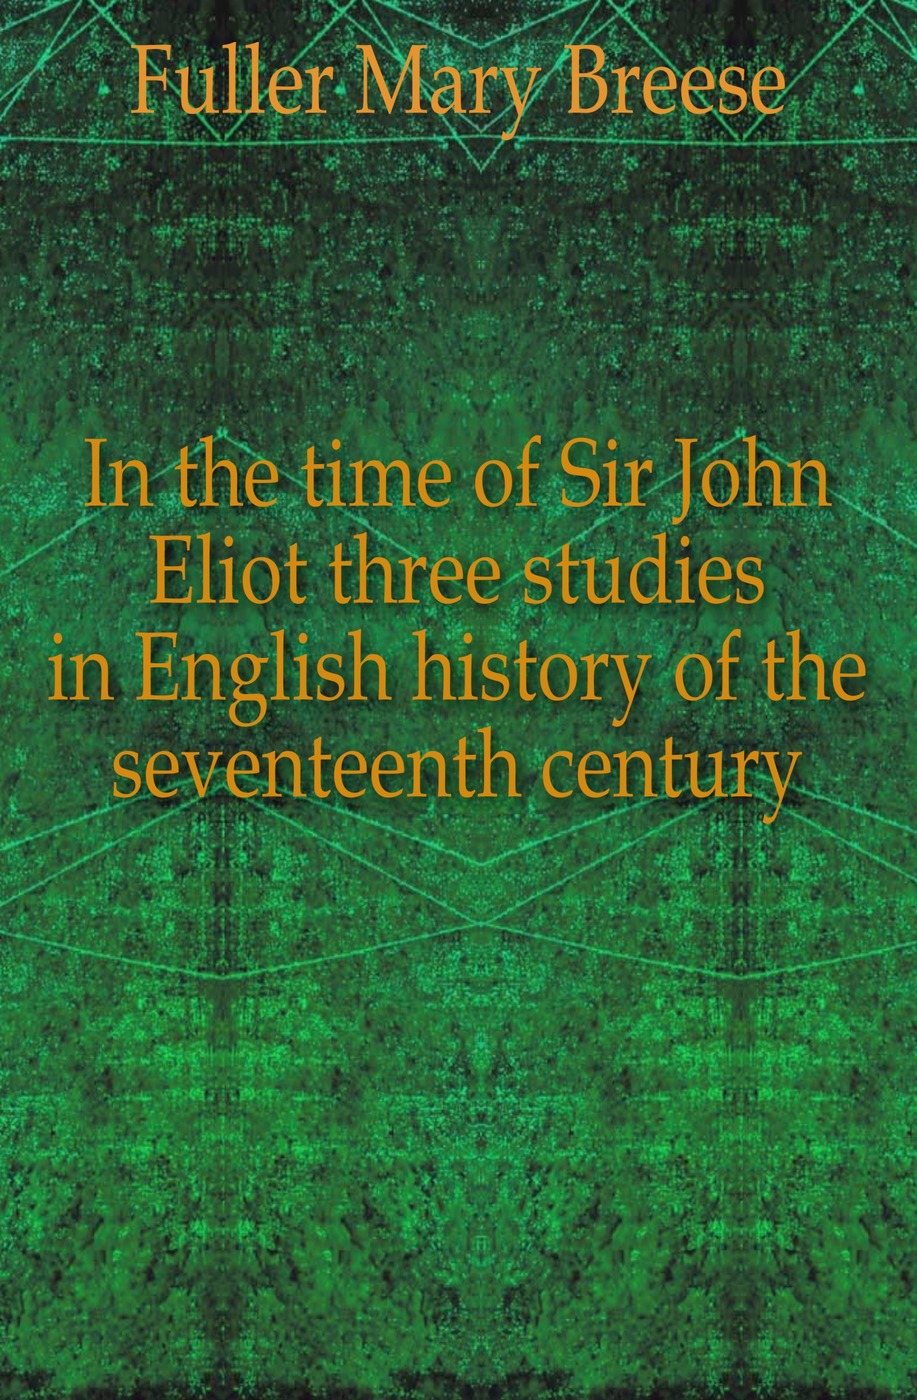 In the time of Sir John Eliot three studies in English history of the seventeenth century